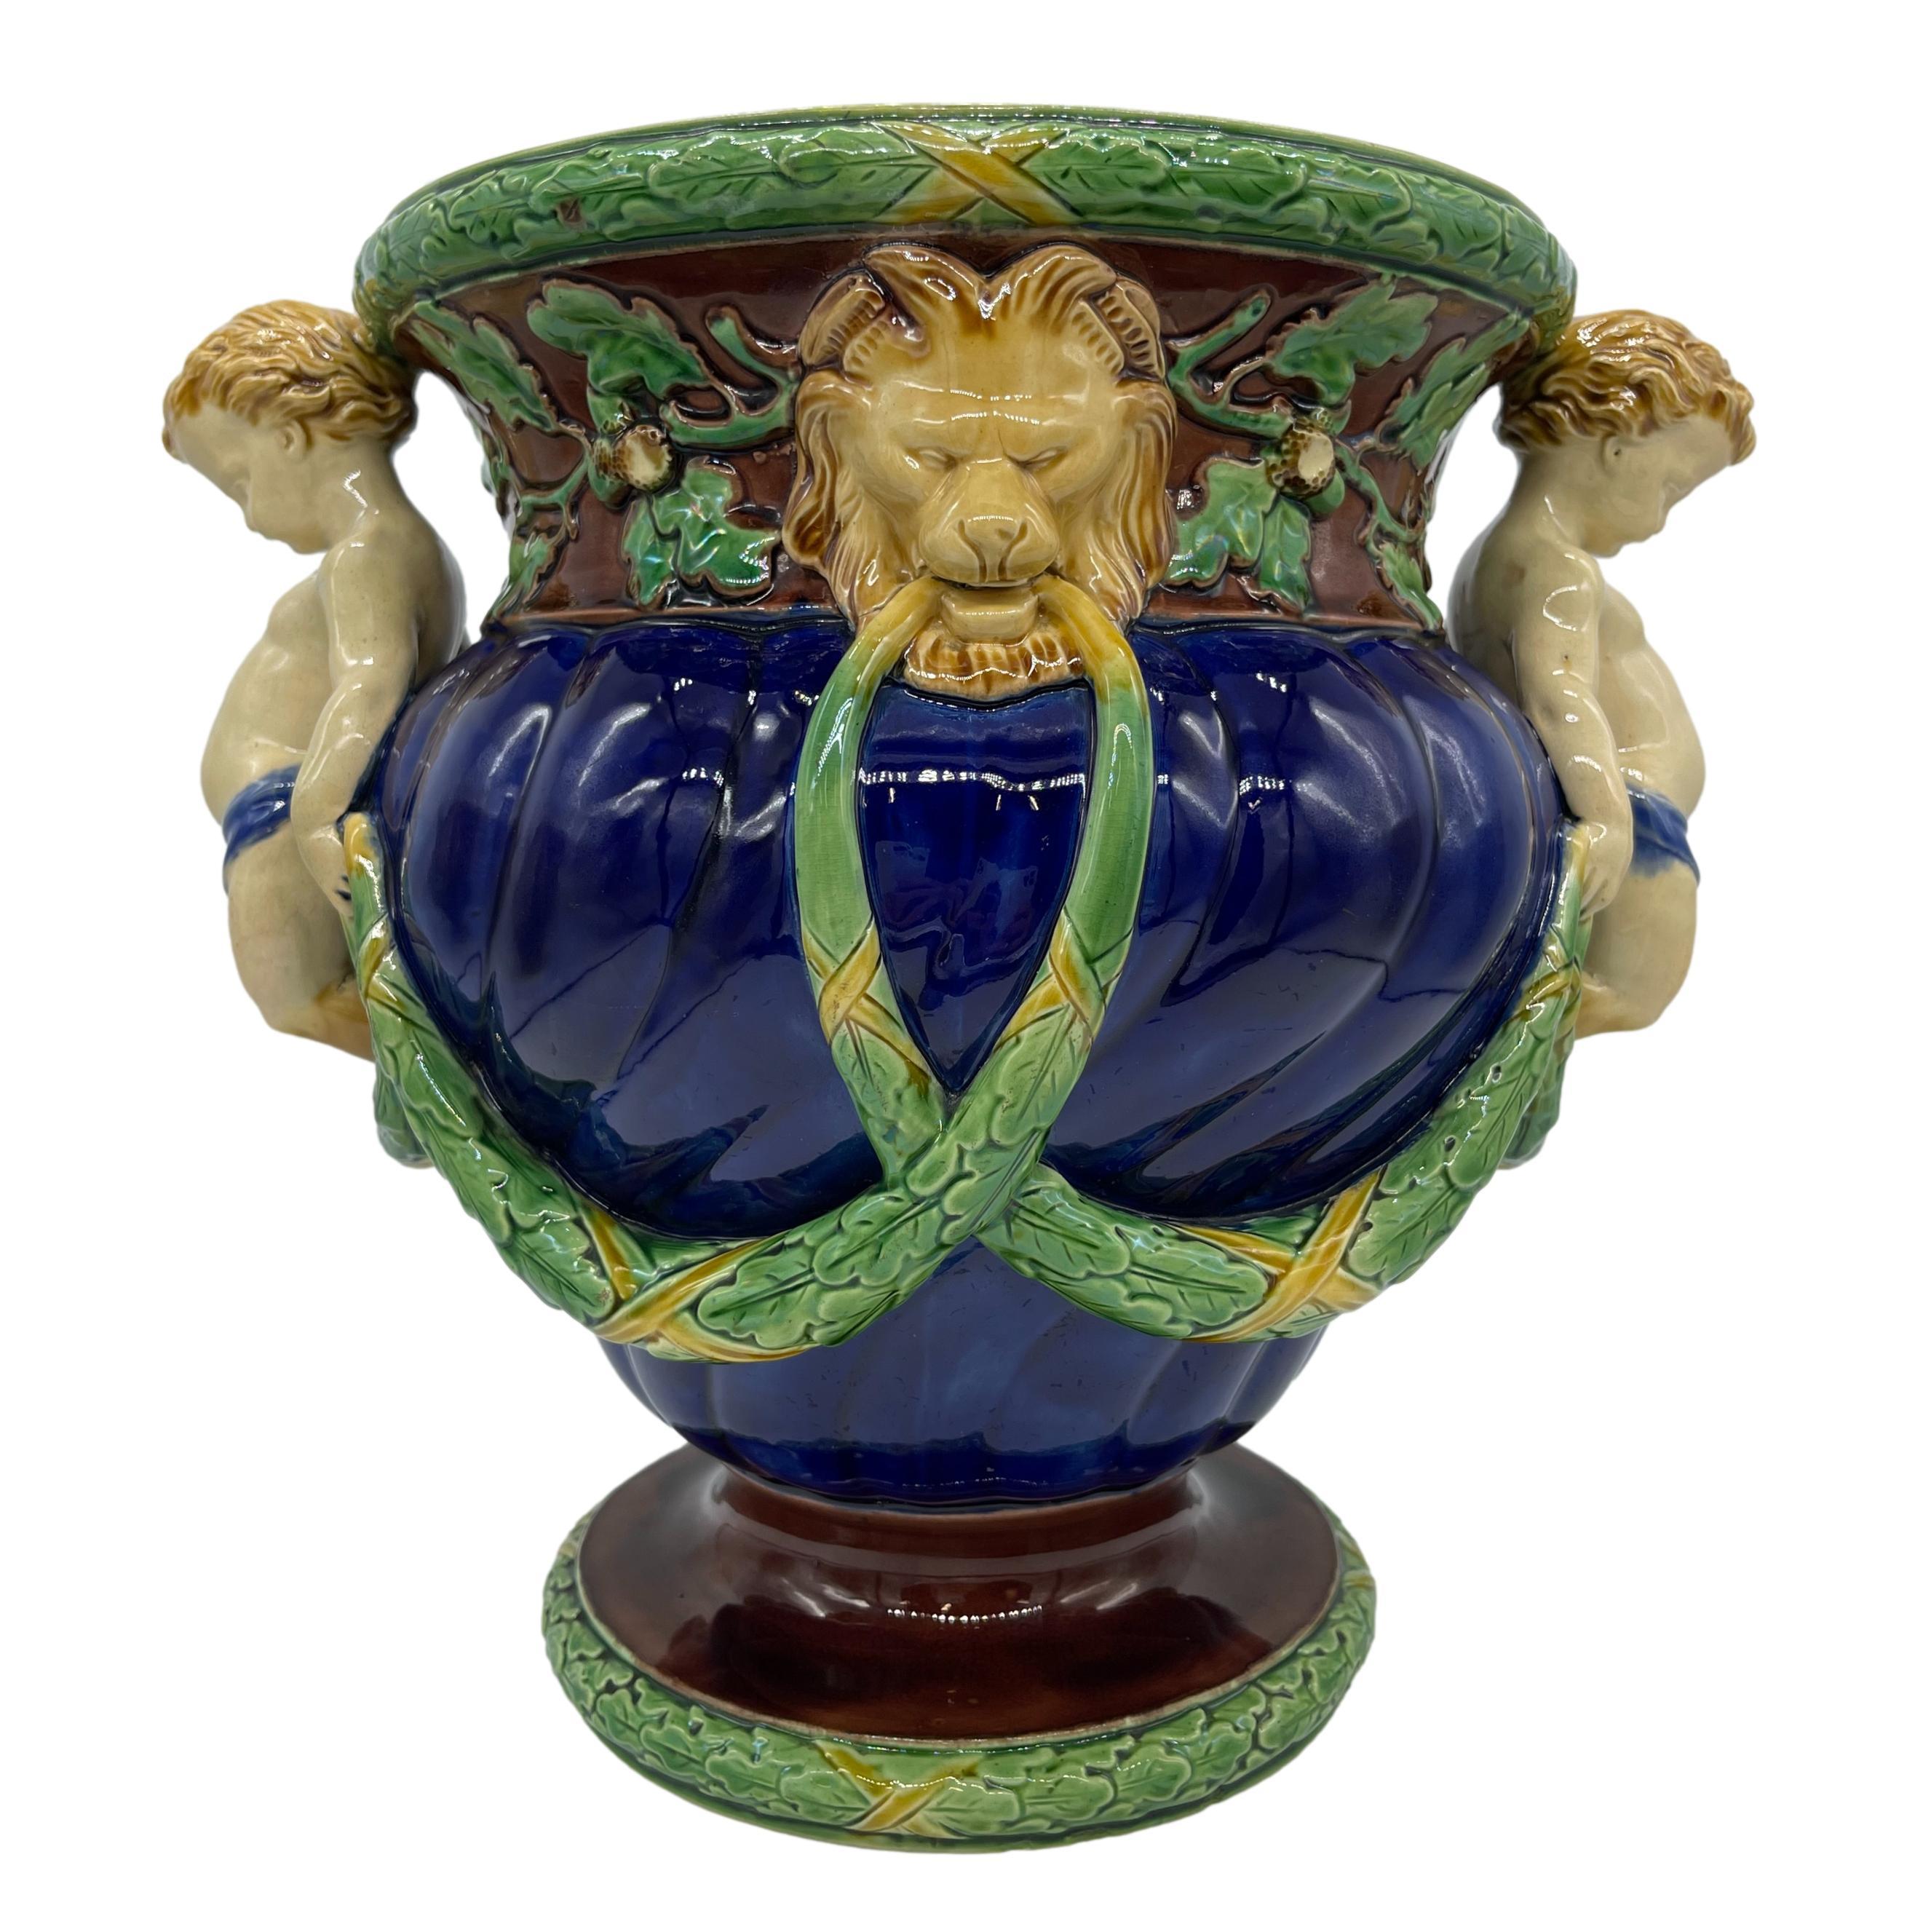 Molded Minton Majolica Wine Cooler with Fauns, Oak Garlands on Cobalt, Dated 1865